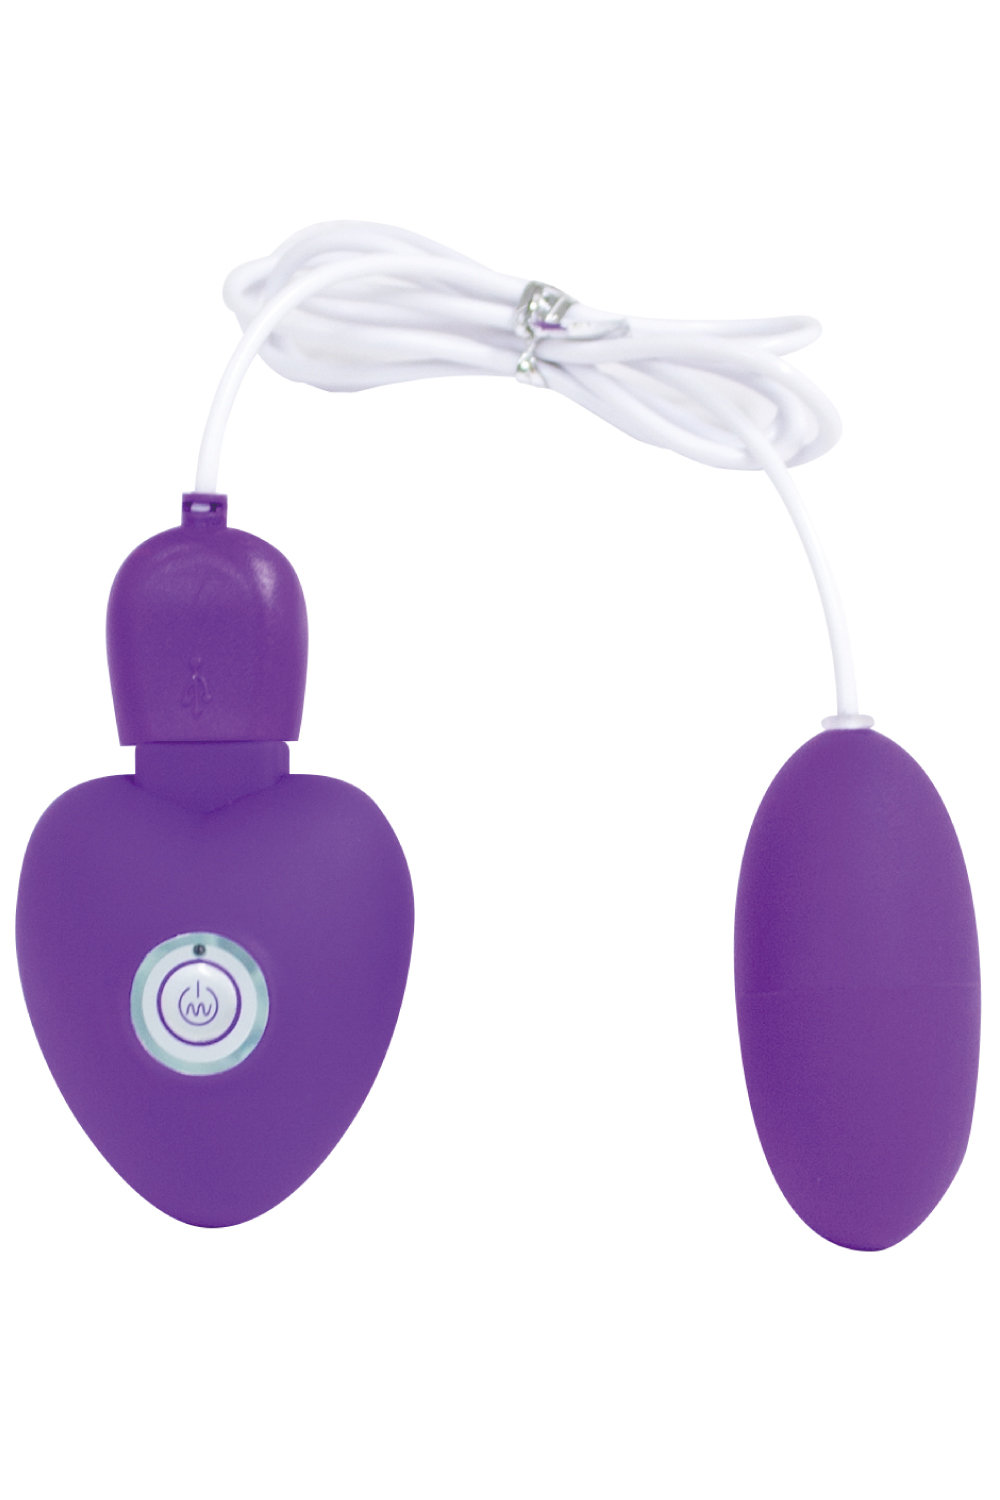 USB充電式パープルローター(USB Rechargeable Rotor Purple)